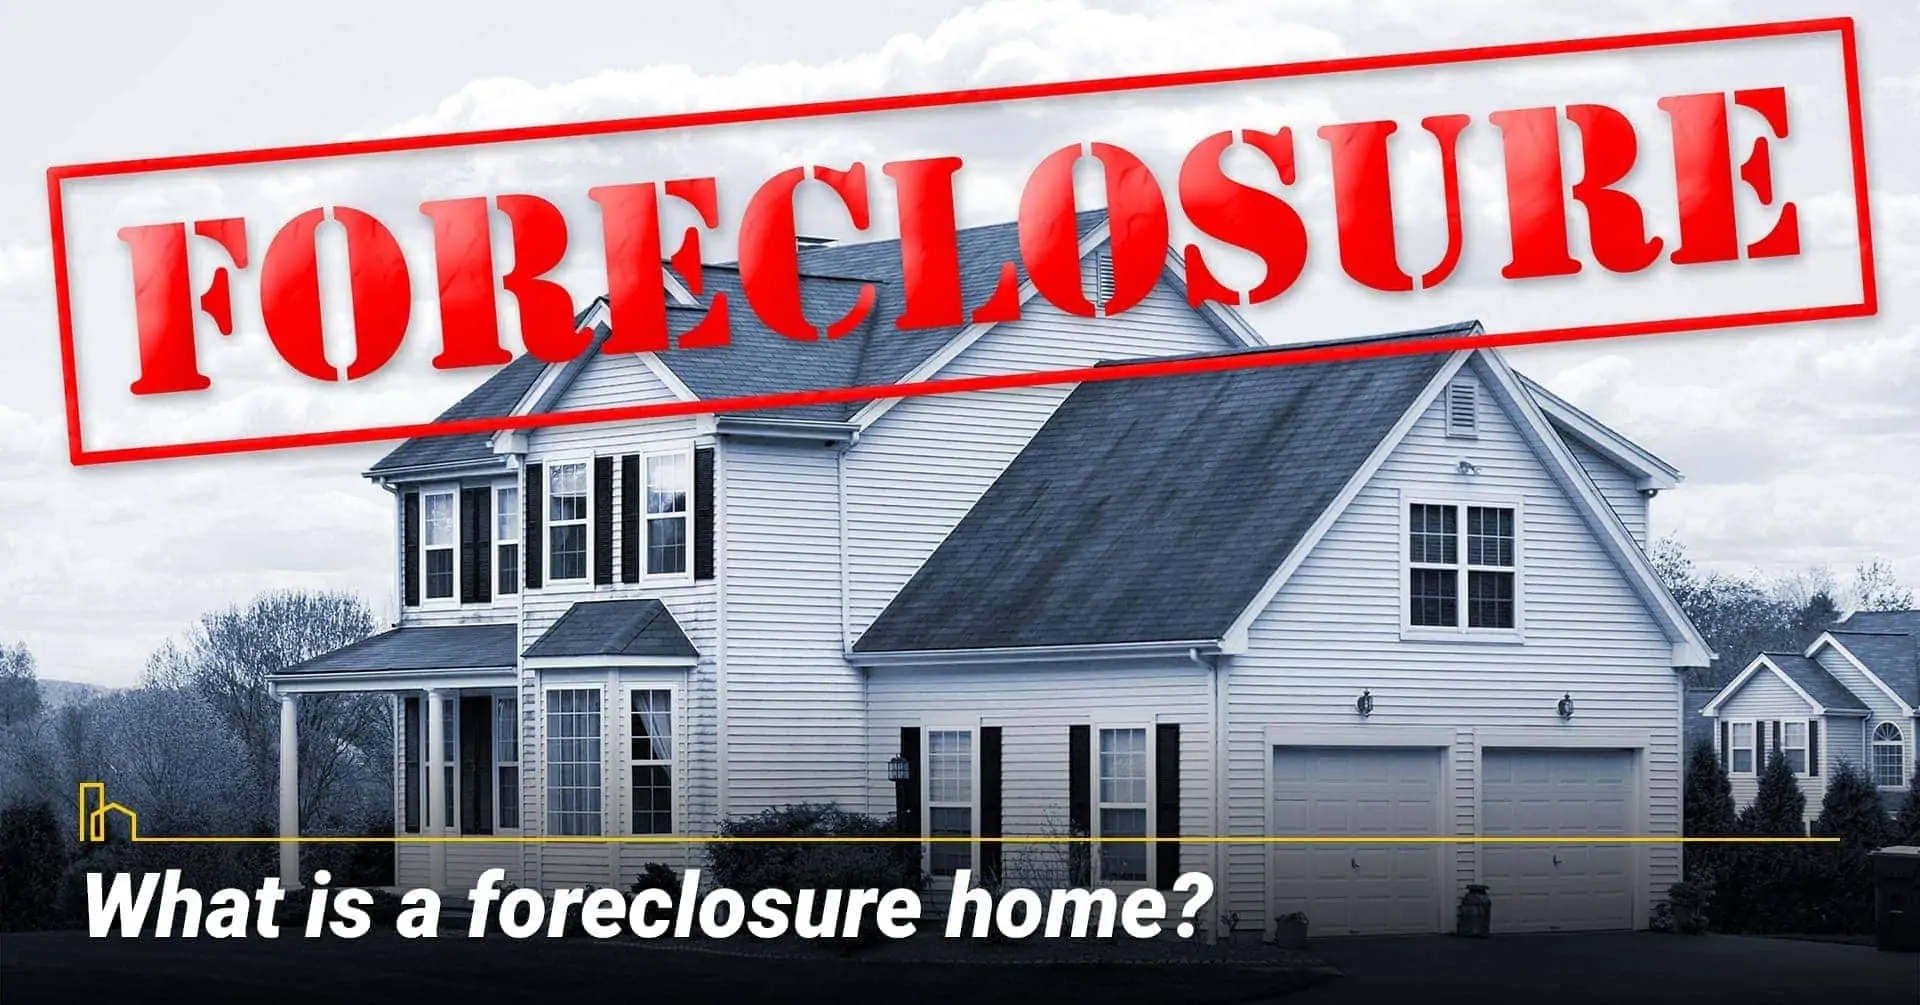 What is a foreclosure home? unable to make mortgage payments